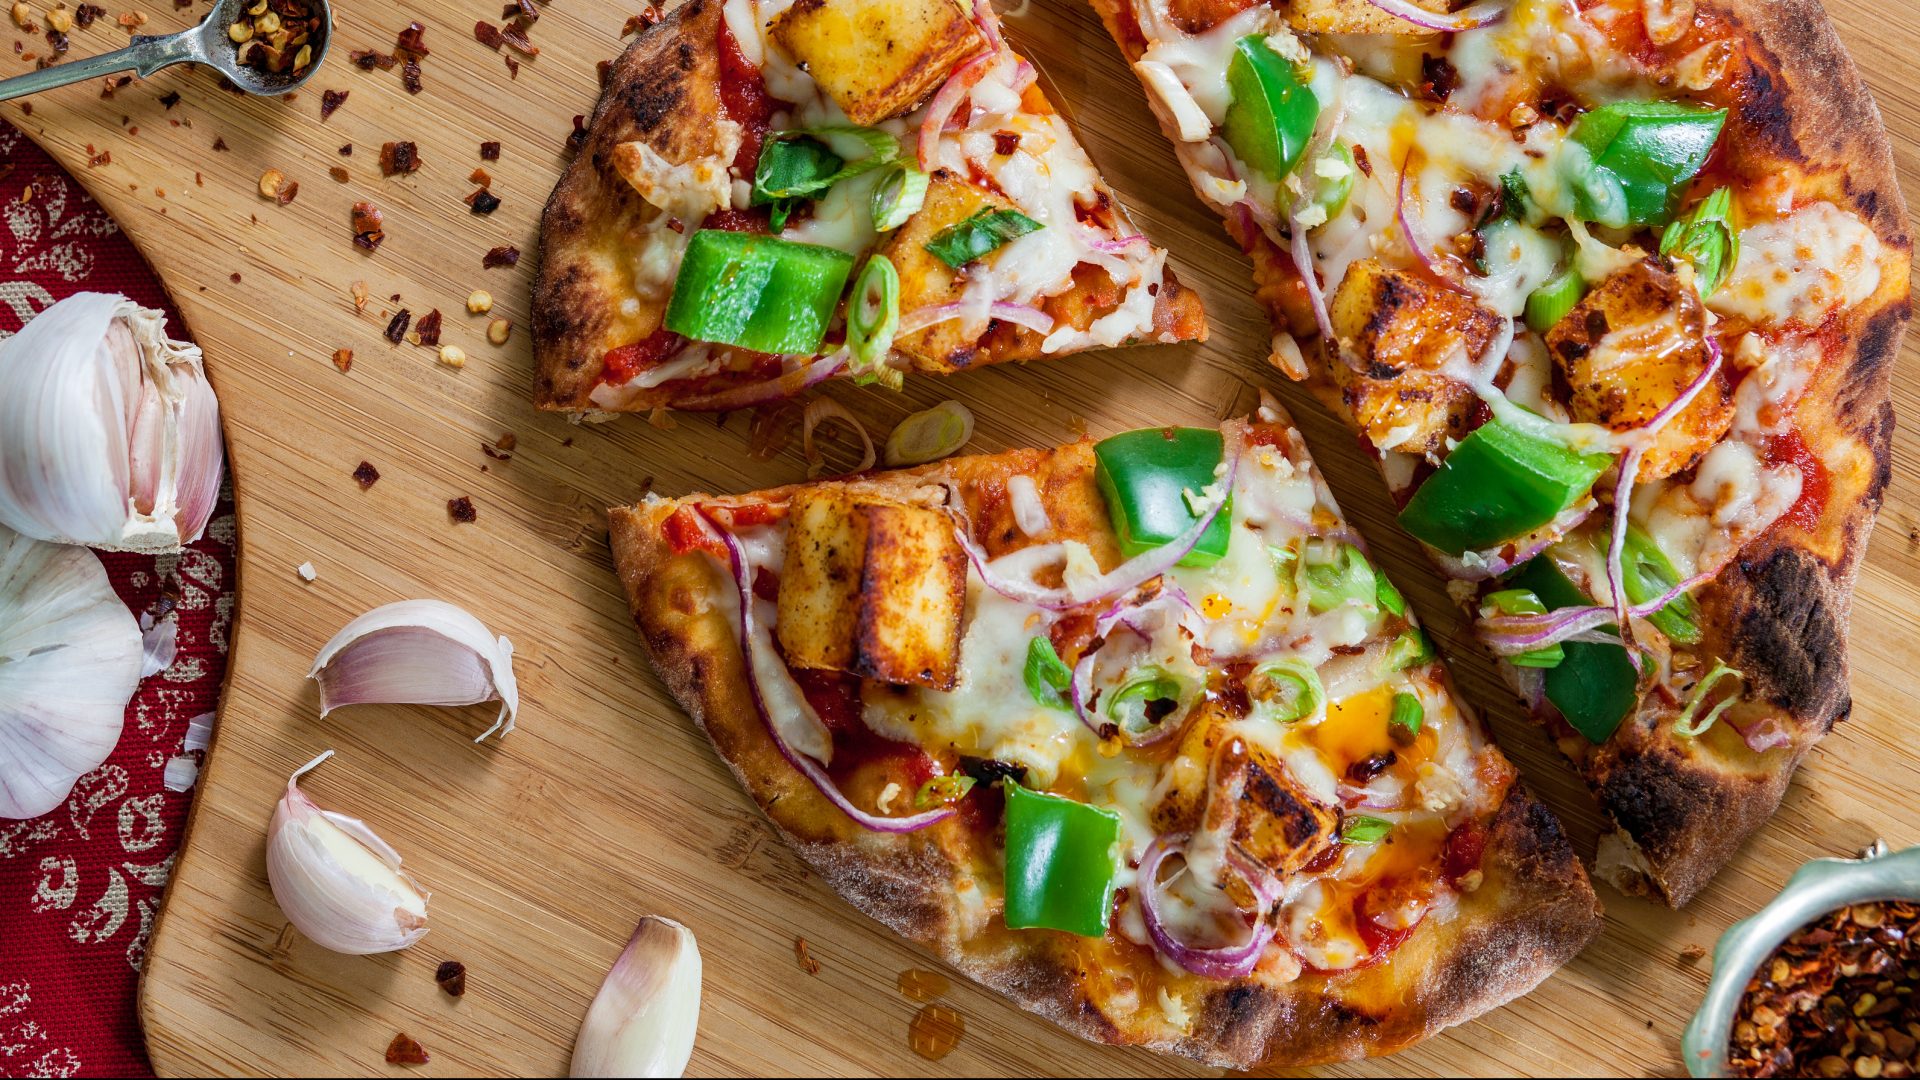 Stonefire Naan as an onion and pepper pizza. High-quality pizza crusts for foodservice with garnishes surrounding a restaurant menu inspired setting